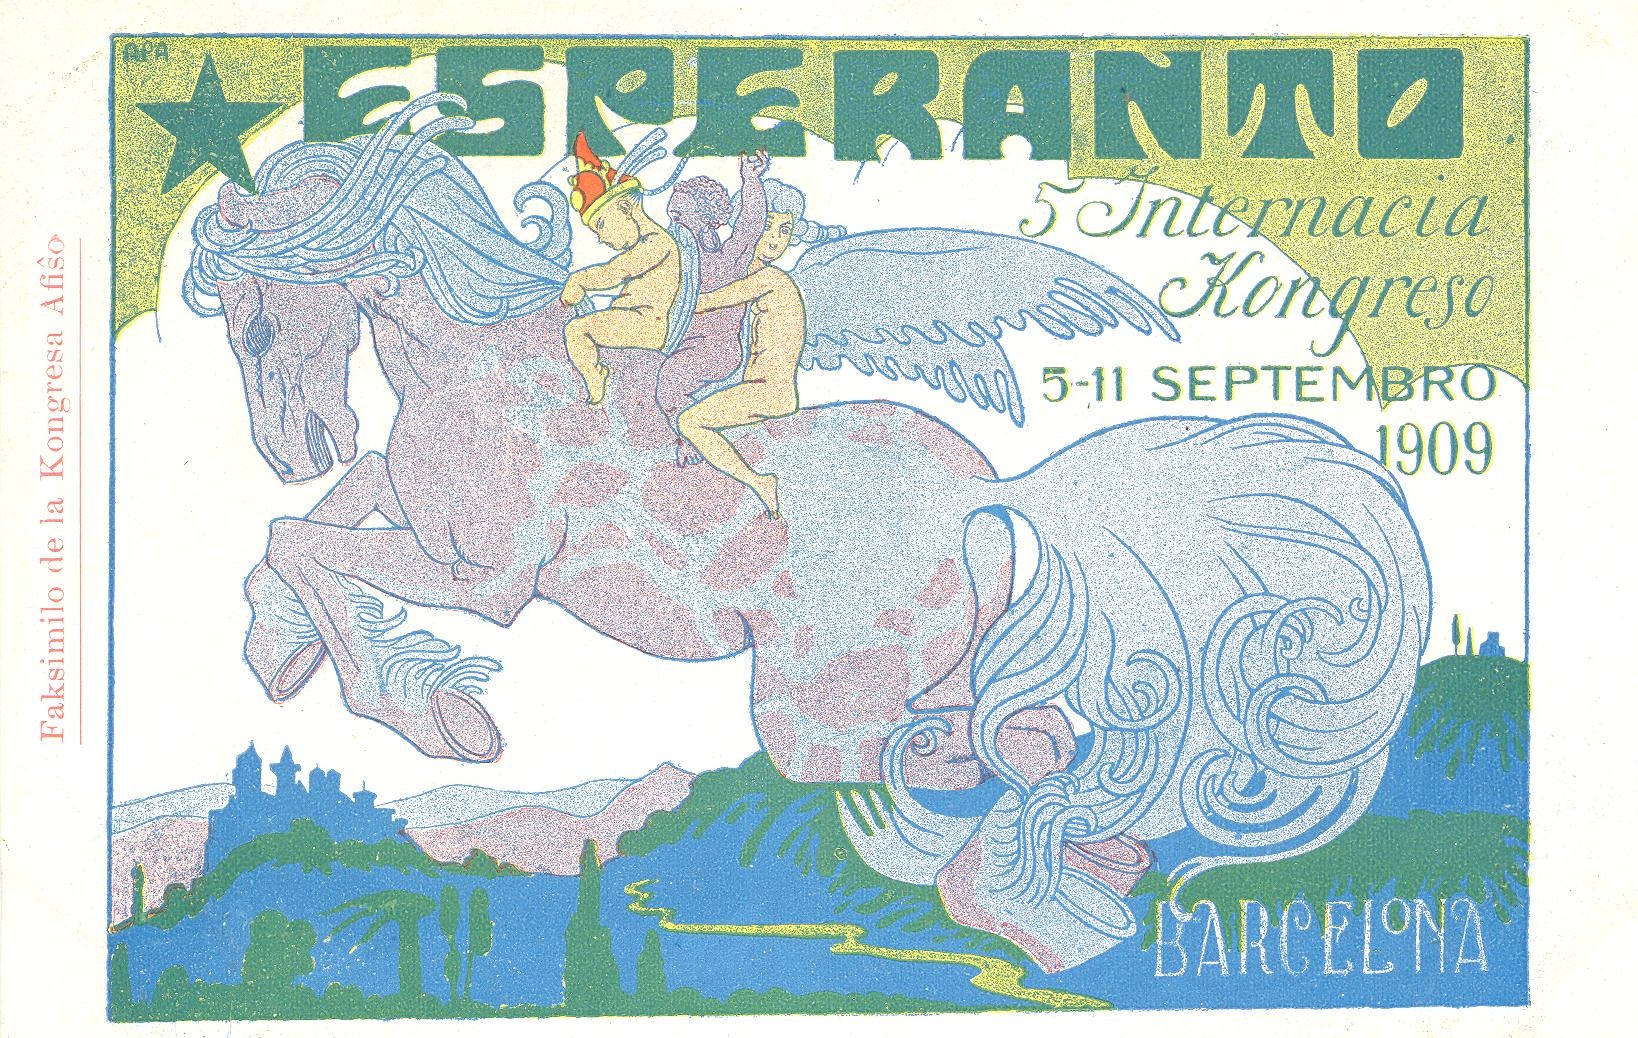 A poster advertising the International Esperanto Congres in Barcelona in 1909, with an illustration of three winged figures riding a horse